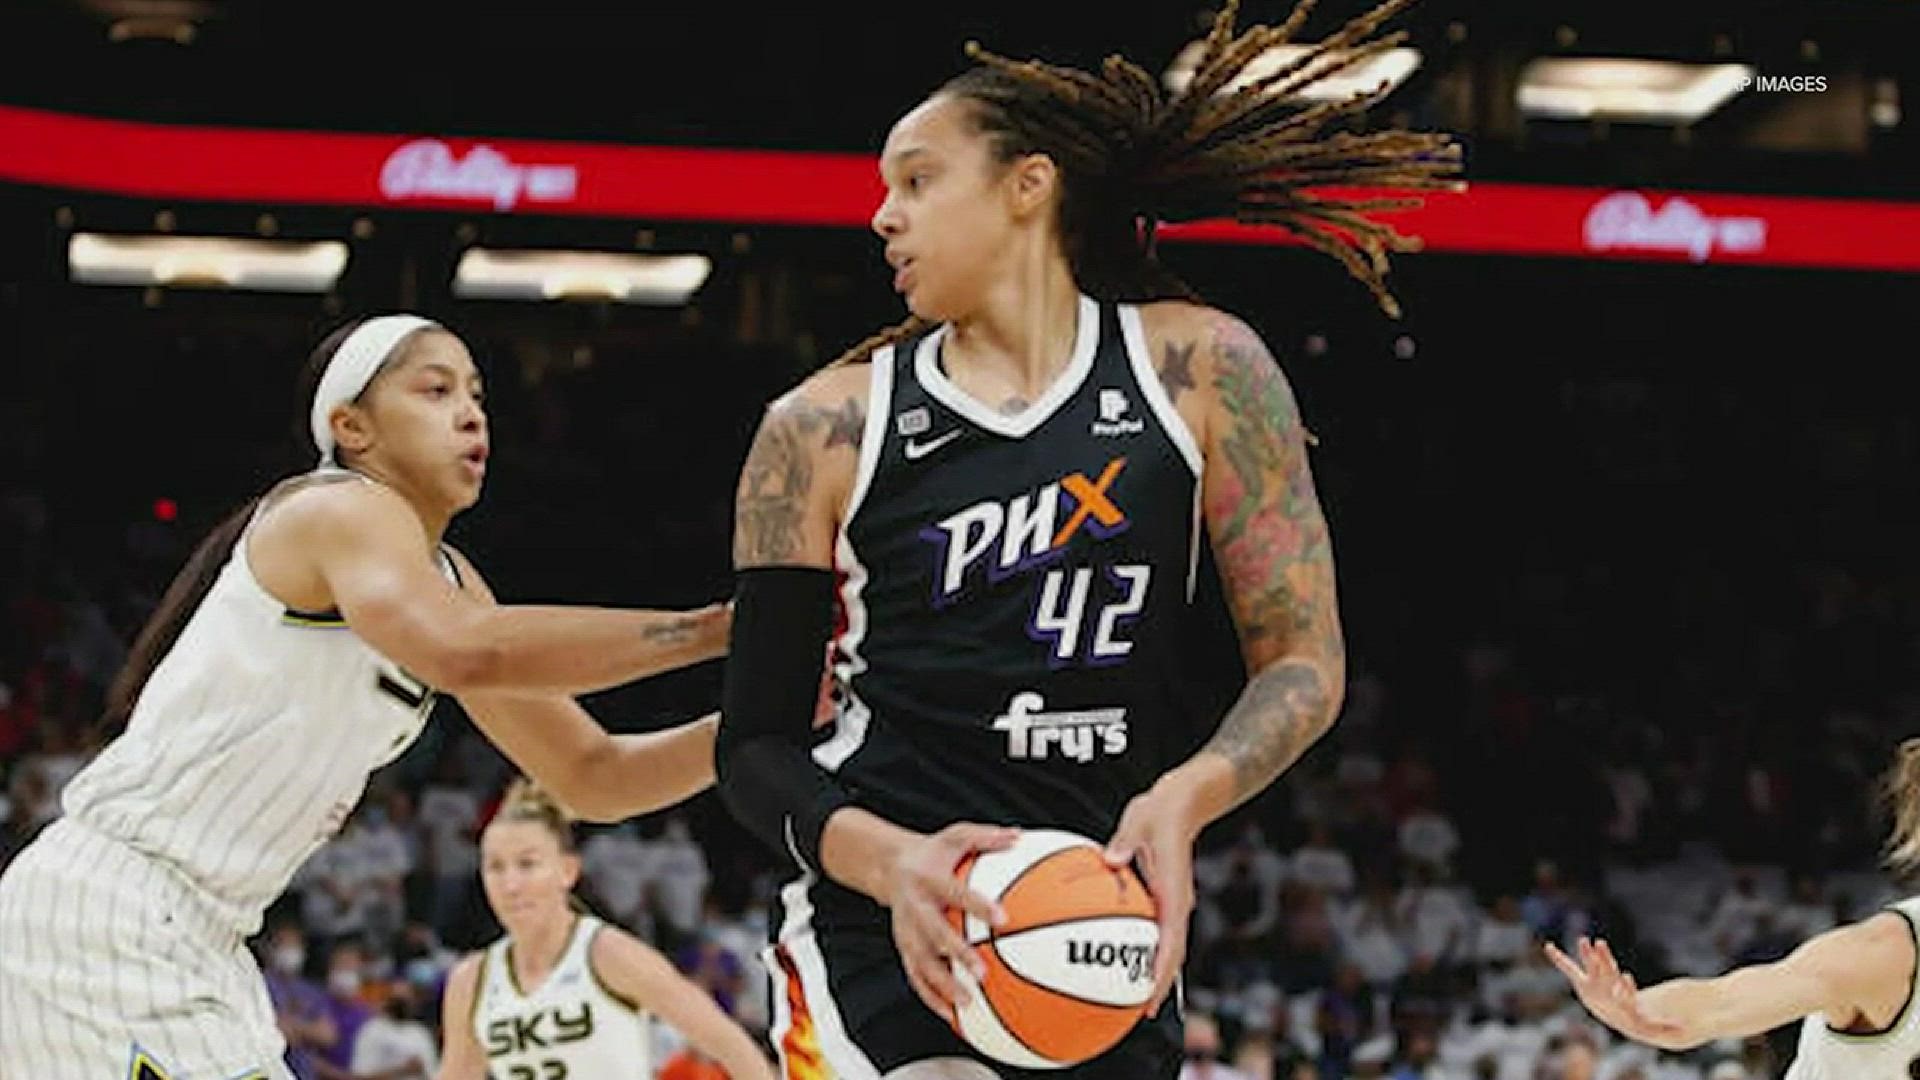 The Texas native was also honored by the WNBA with floor decals on all 12 home courts. Griner has been detained in Russia since February.